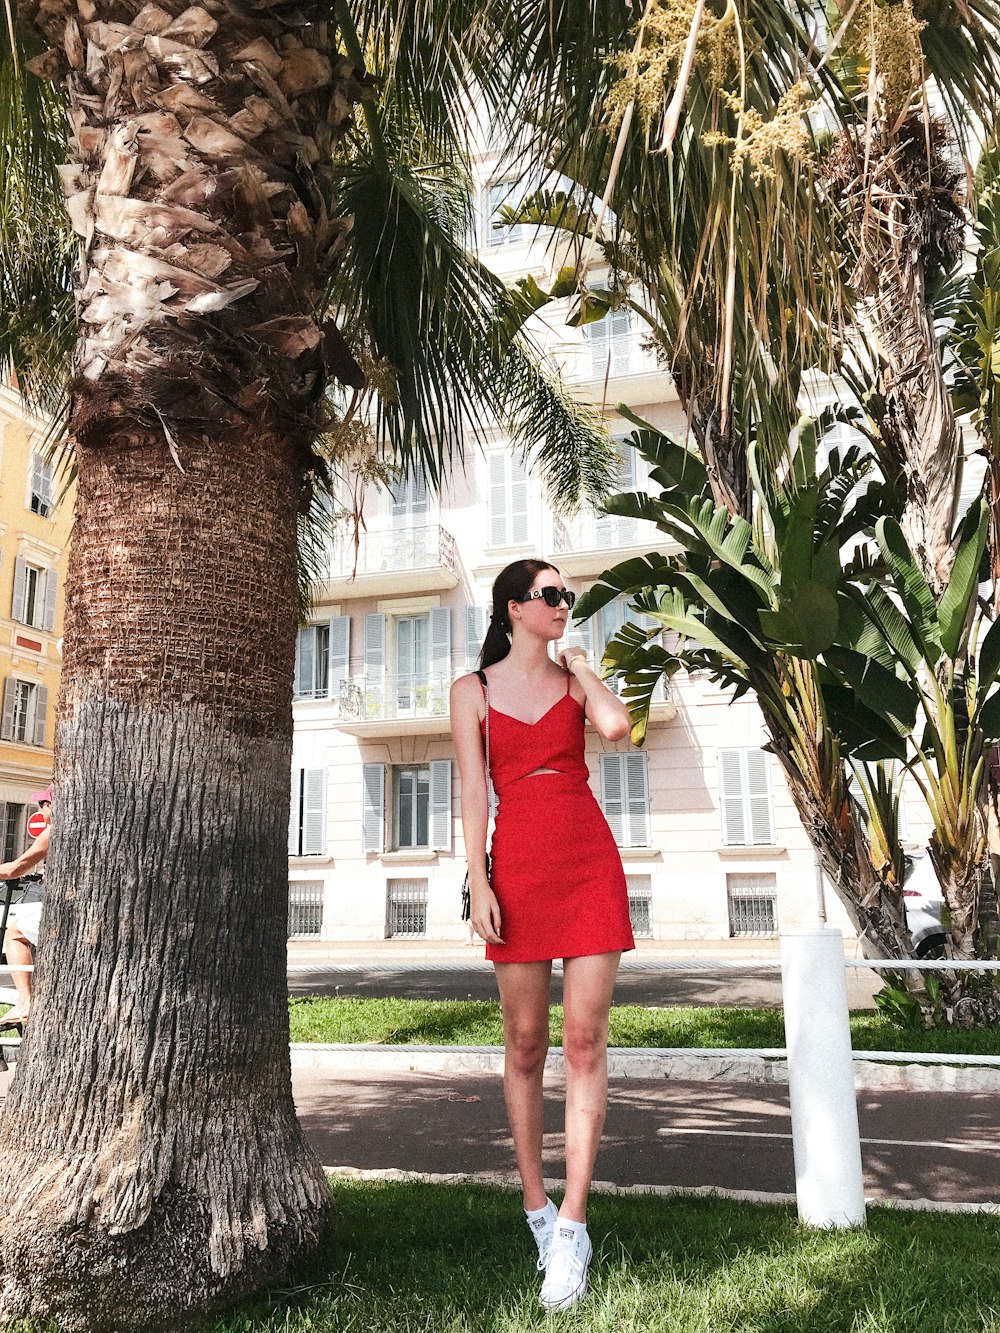 woman in red sleeveless dress standing on gray concrete pathway near palm tree during daytime